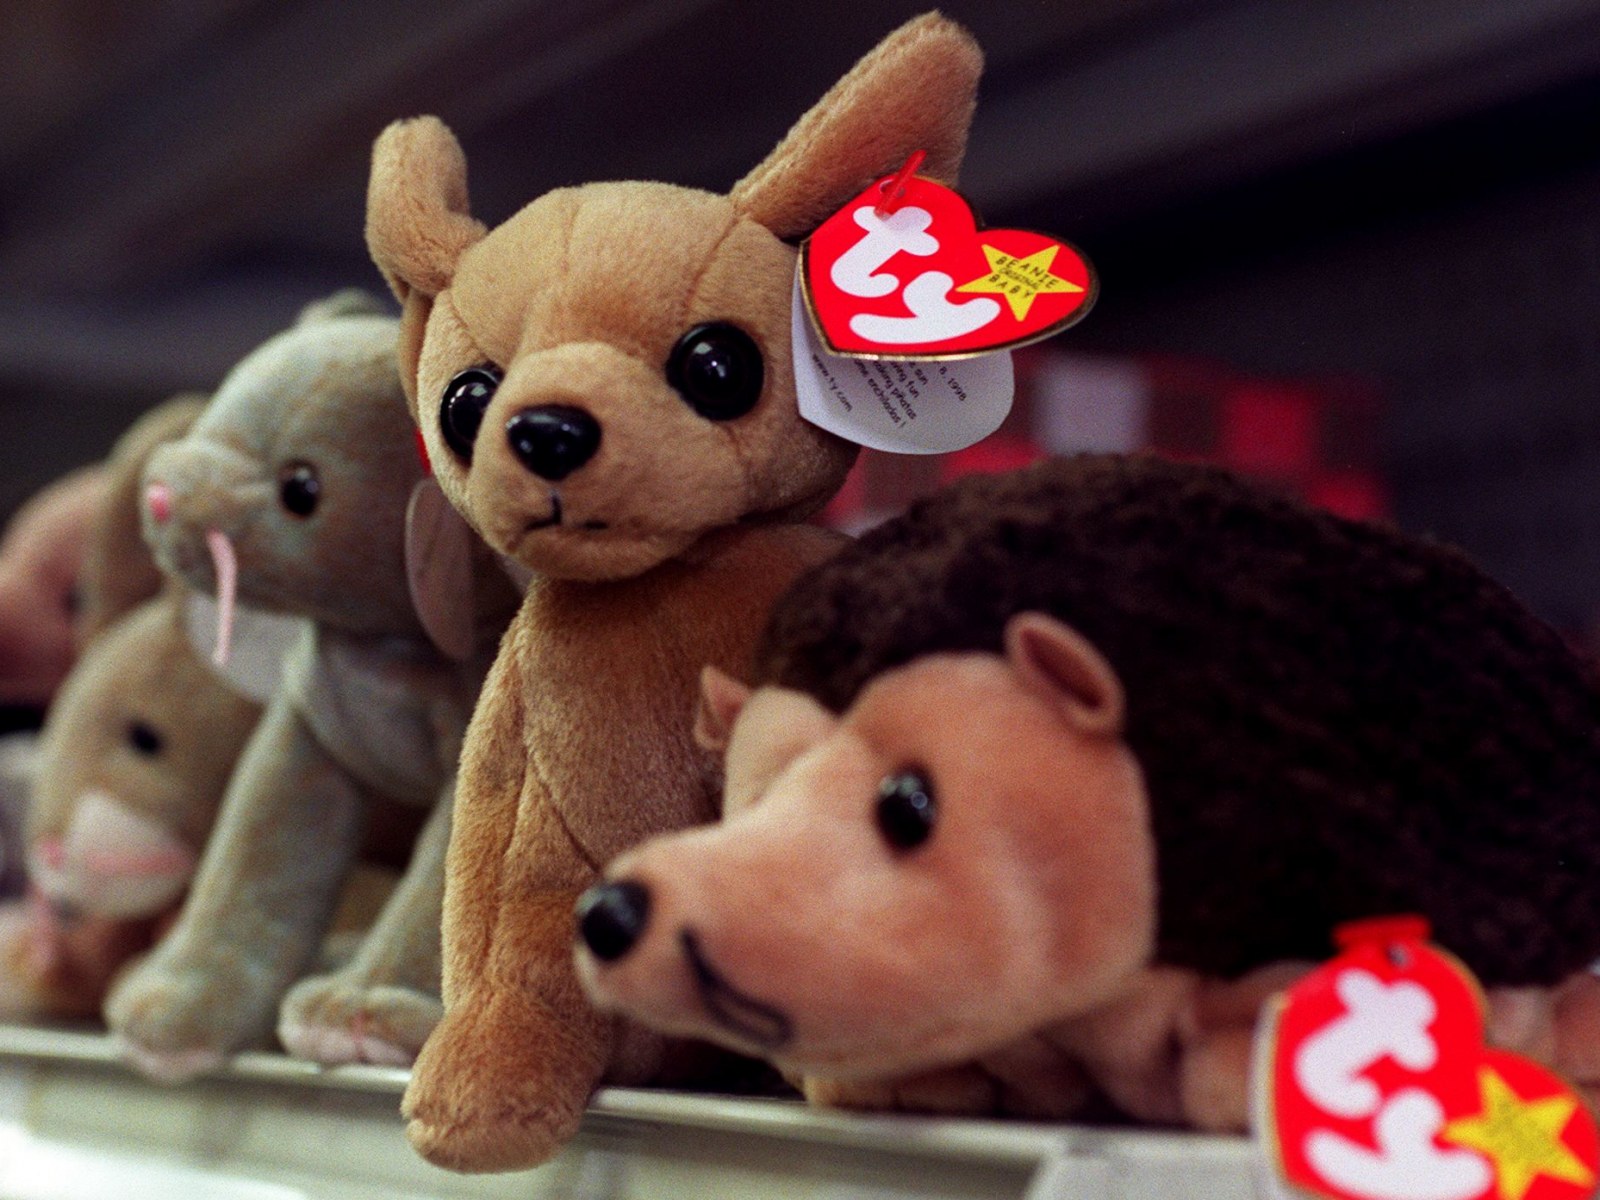 The Rarest Beanie Babies of All-Time That Every Millennial Kid Pined After